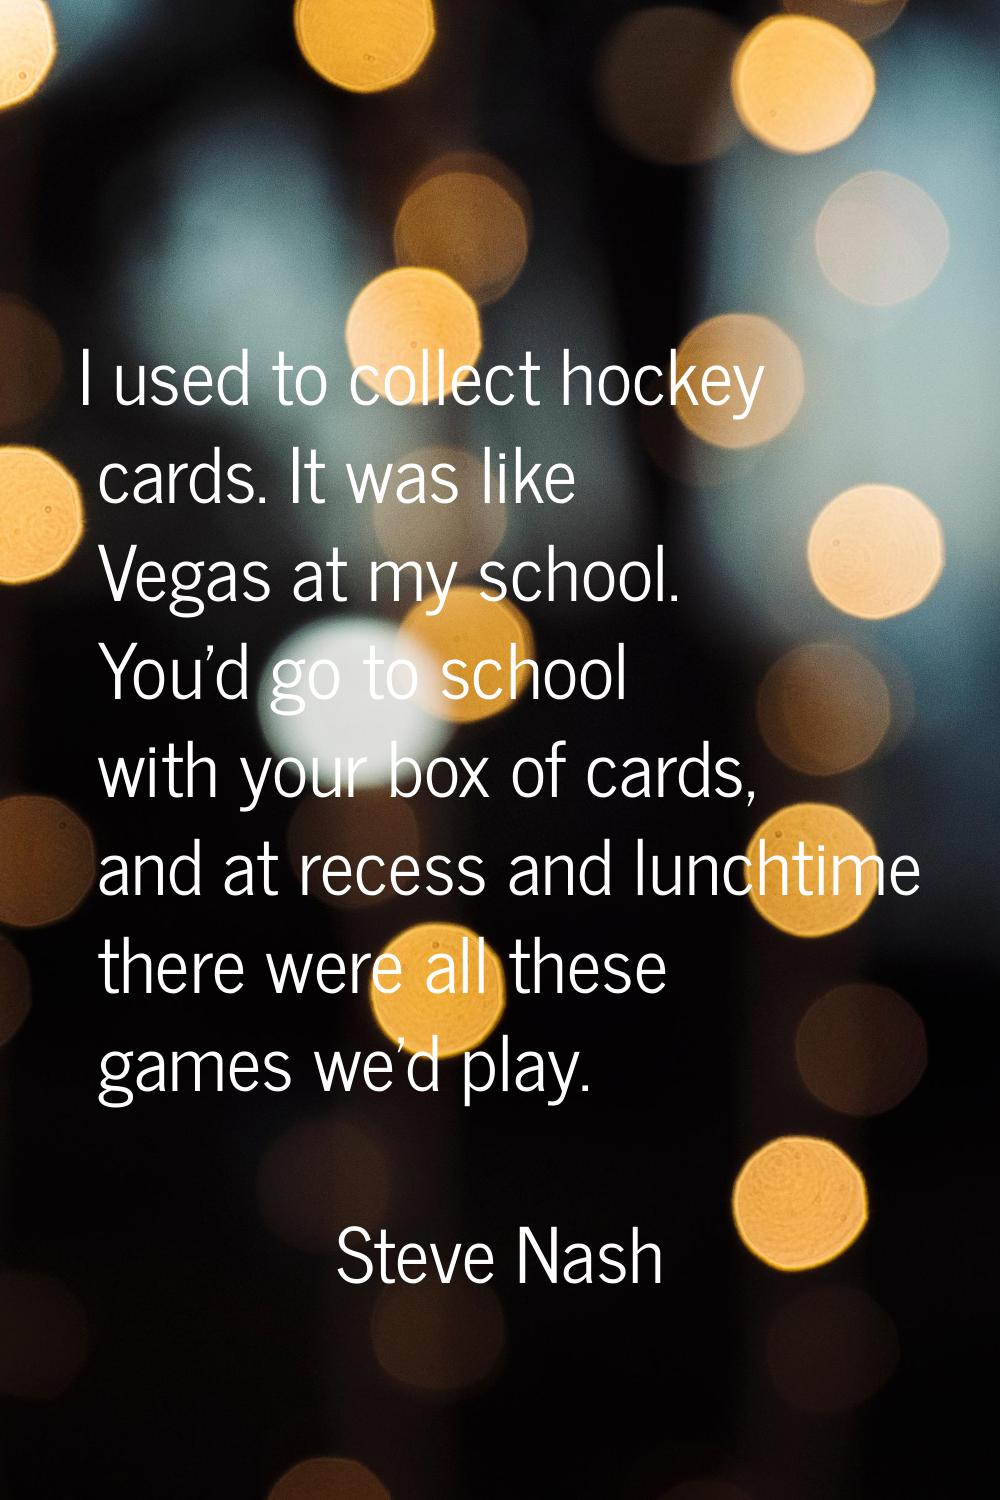 I used to collect hockey cards. It was like Vegas at my school. You'd go to school with your box of